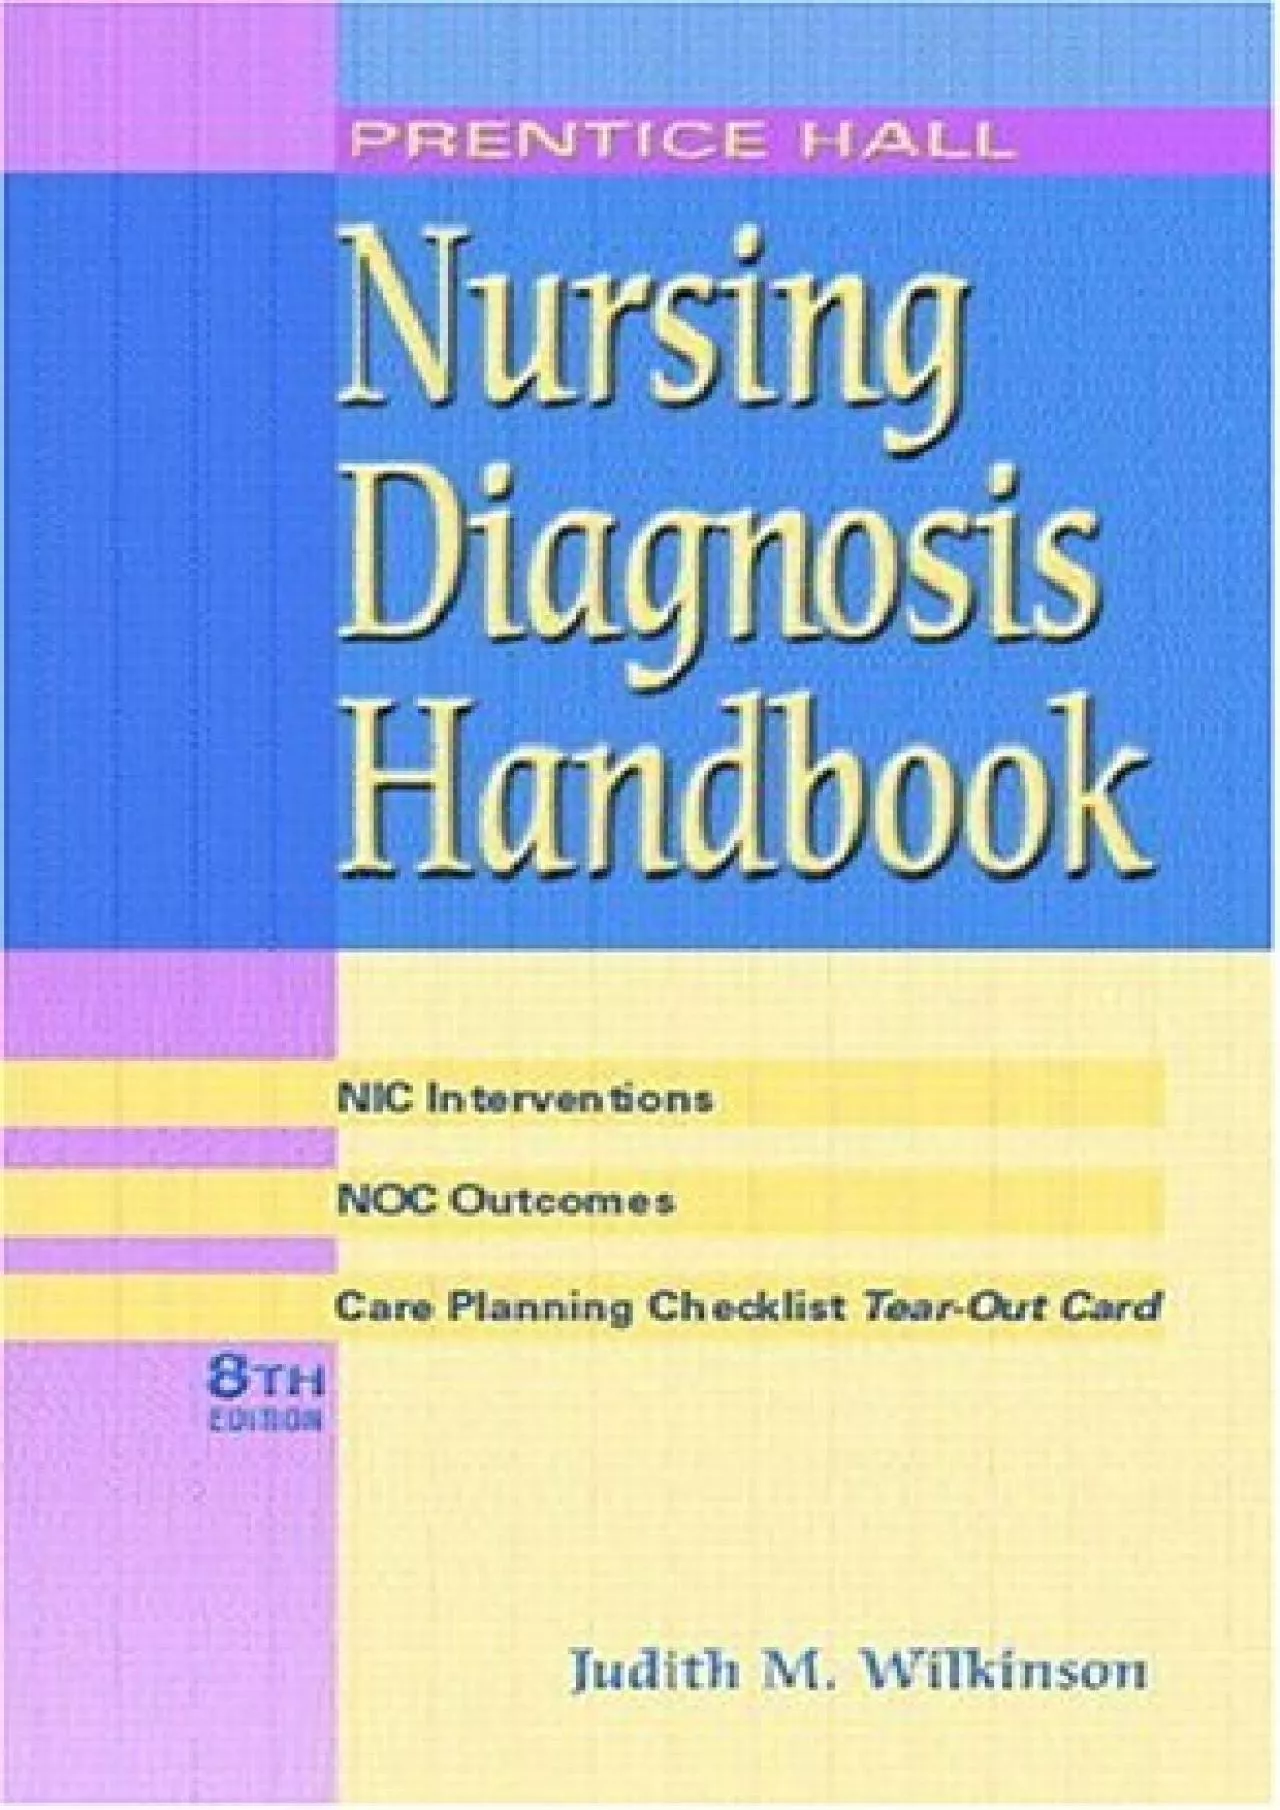 (BOOK)-Nursing Diagnosis Handbook: With Nic Interventions and Noc Outcomes (Wilkinson,